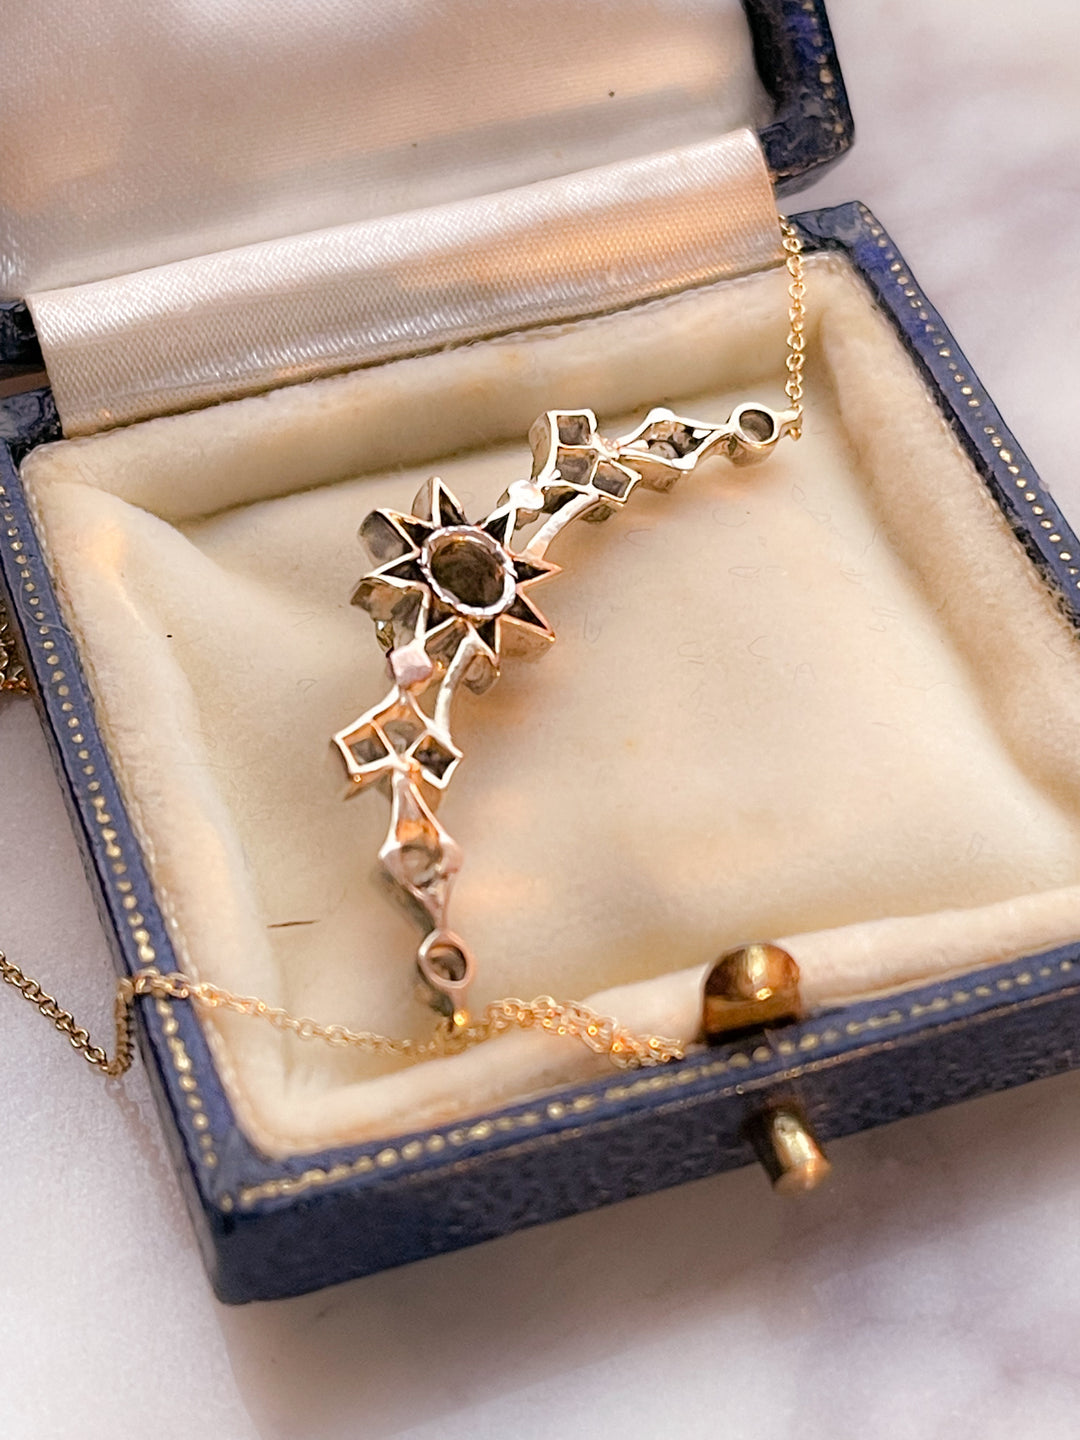 Outstanding Victorian Star-in-Crescent Necklace *include blue and yellow ribbon*